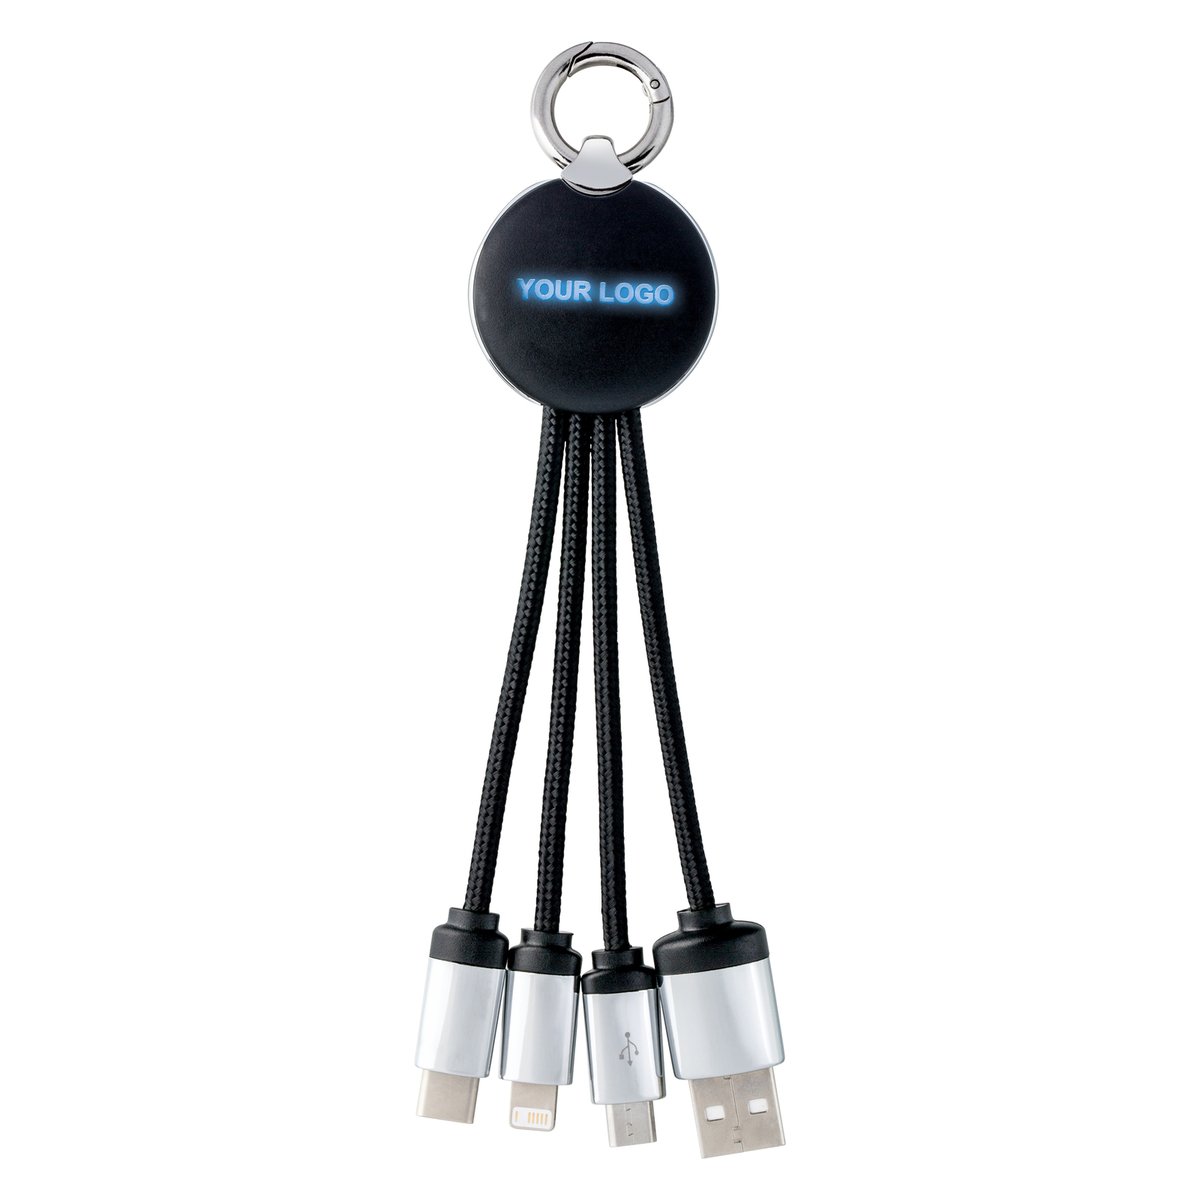 3-in-1 Charging Cable with Light REEVES-PUHALANI black/blue